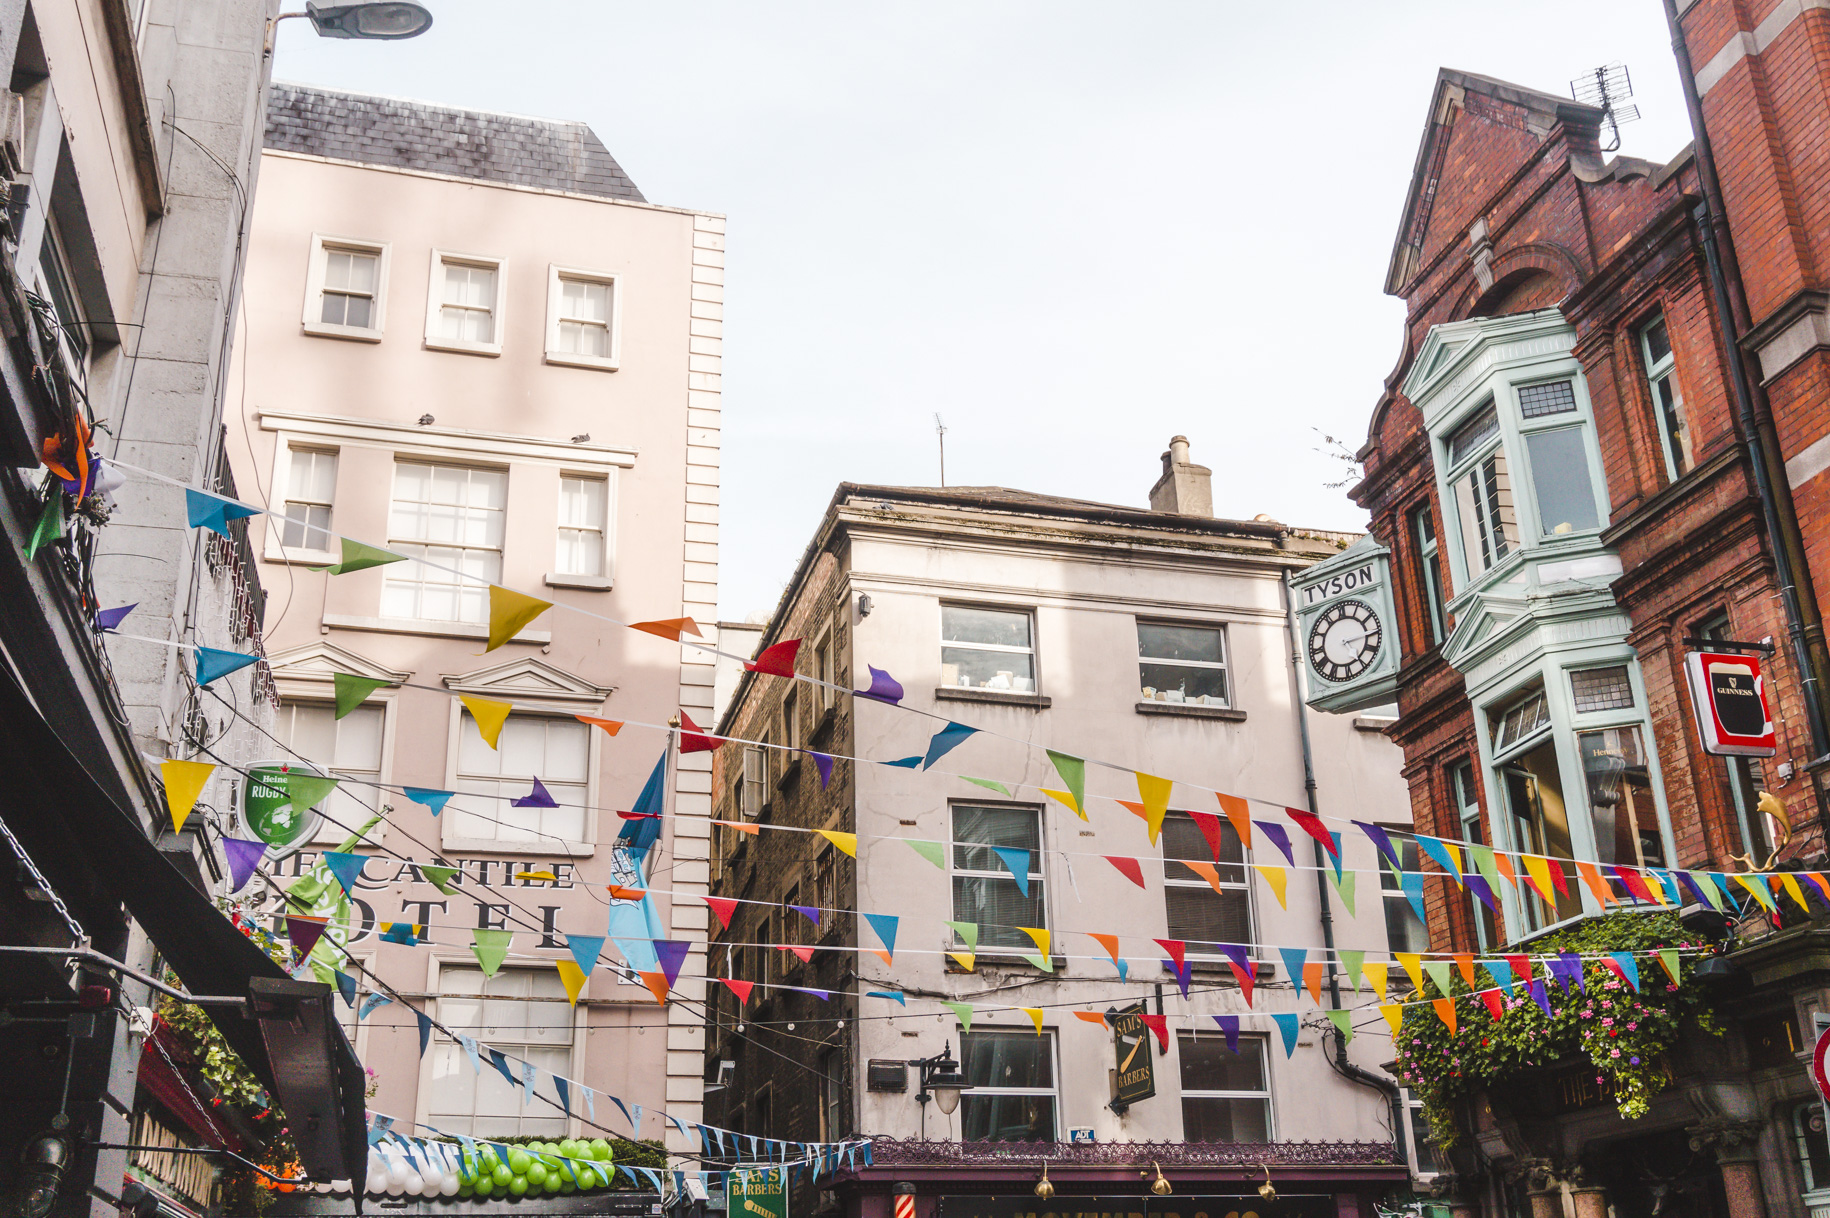 Colourful Dublin, Ireland. A great solo travel destination that needs to be added to your Europe itinerary.